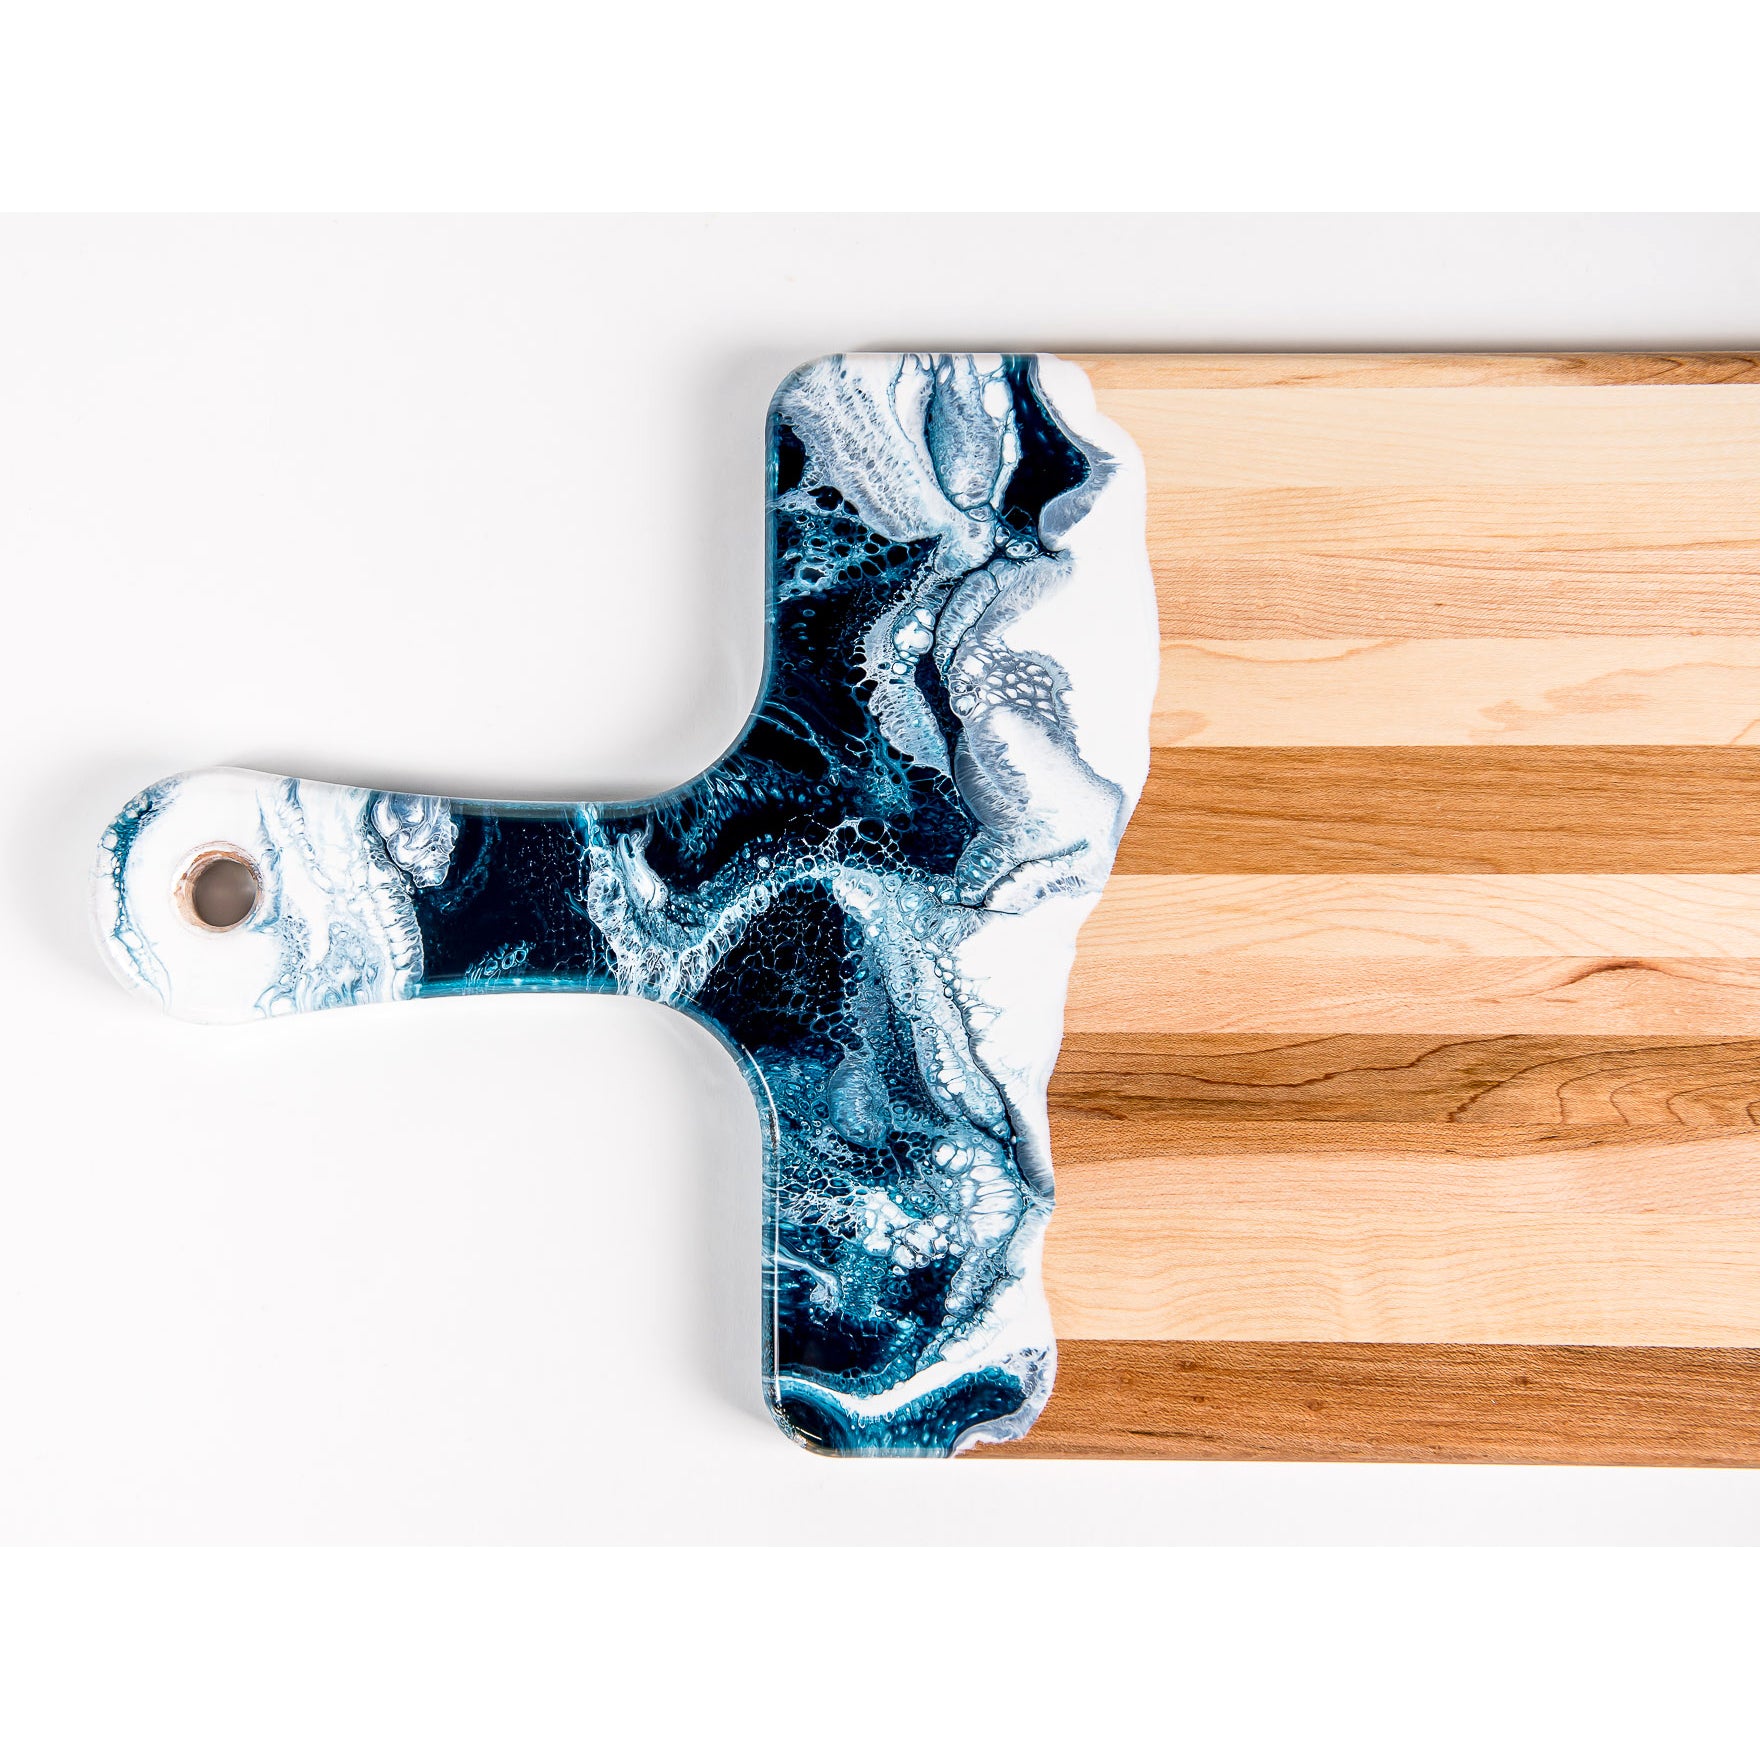 Acacia Resin Cheeseboard in navy and white.